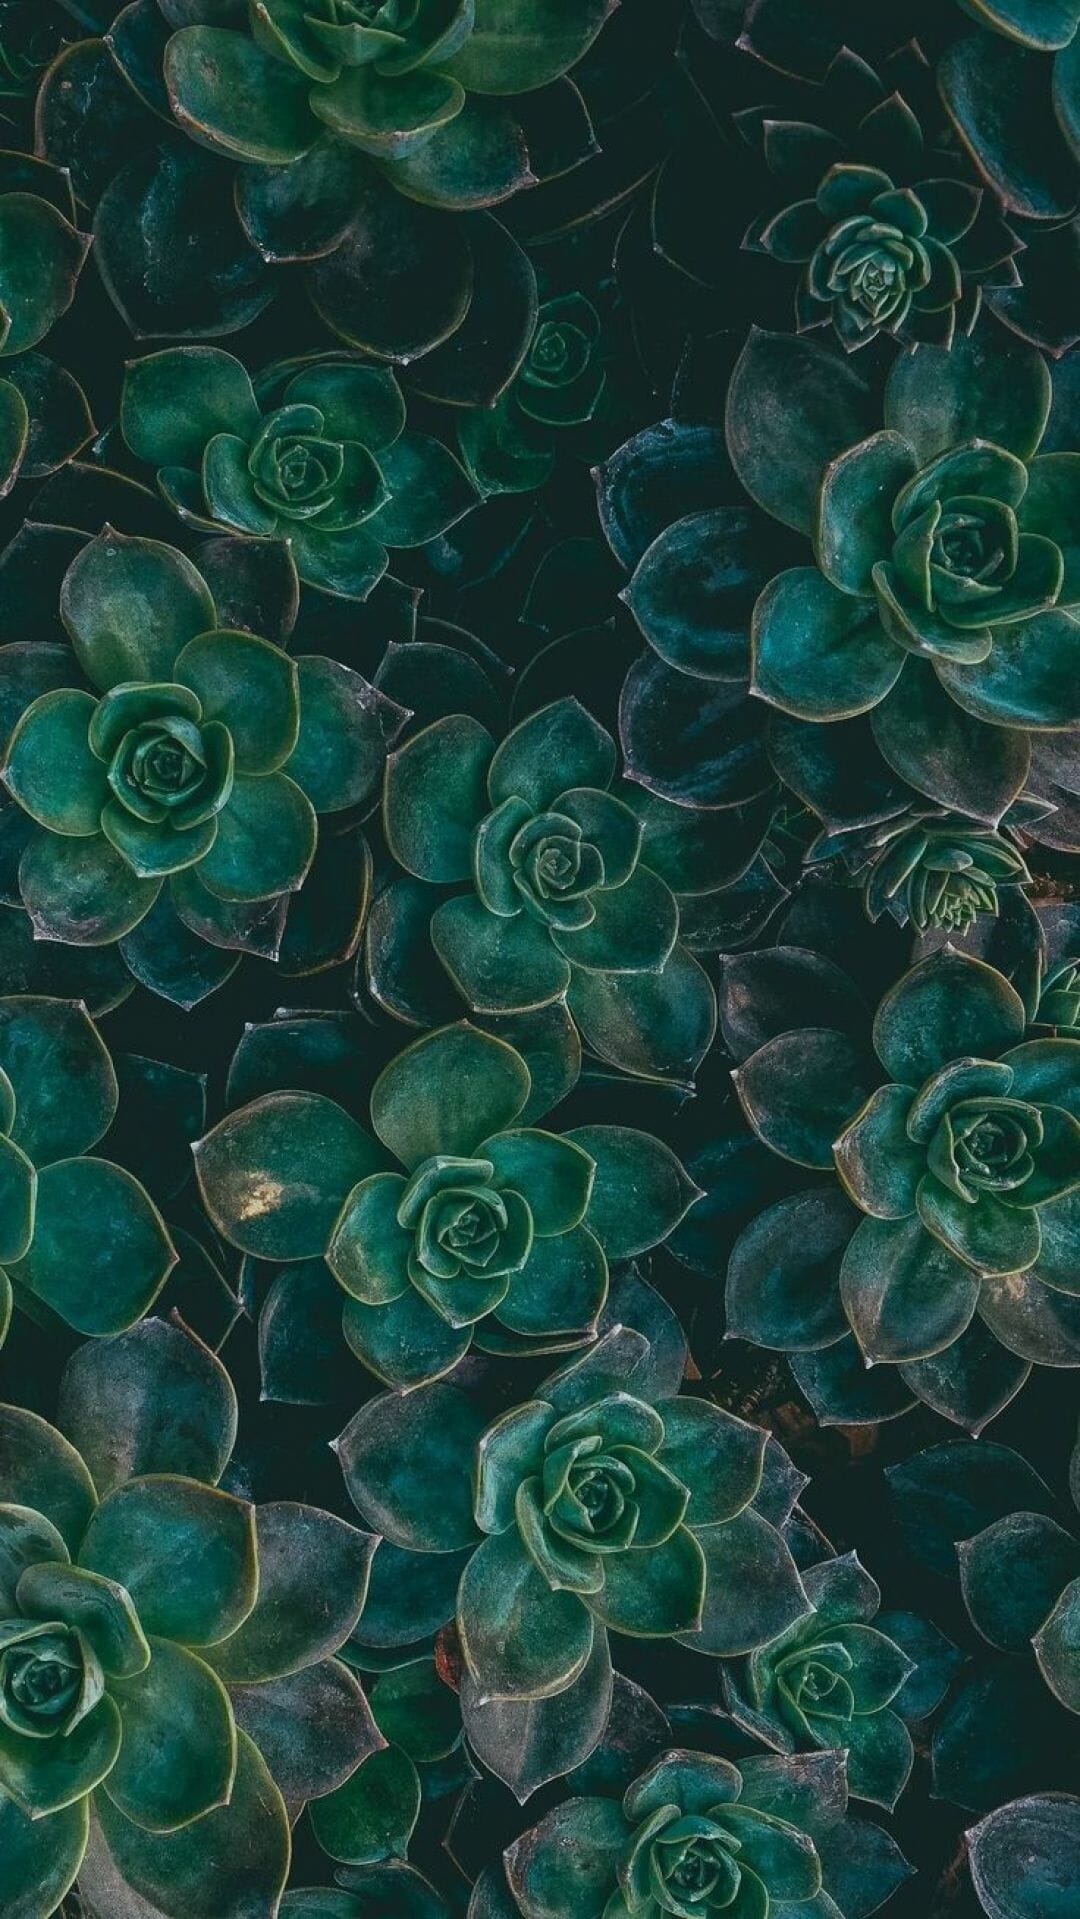 Wallpaper Aesthetic Green Best Of Marble White Background Plants / iPhone HD Wallpaper Background Download HD Wallpaper (Desktop Background / Android / iPhone) (1080p, 4k) (1080x1919) (2021)